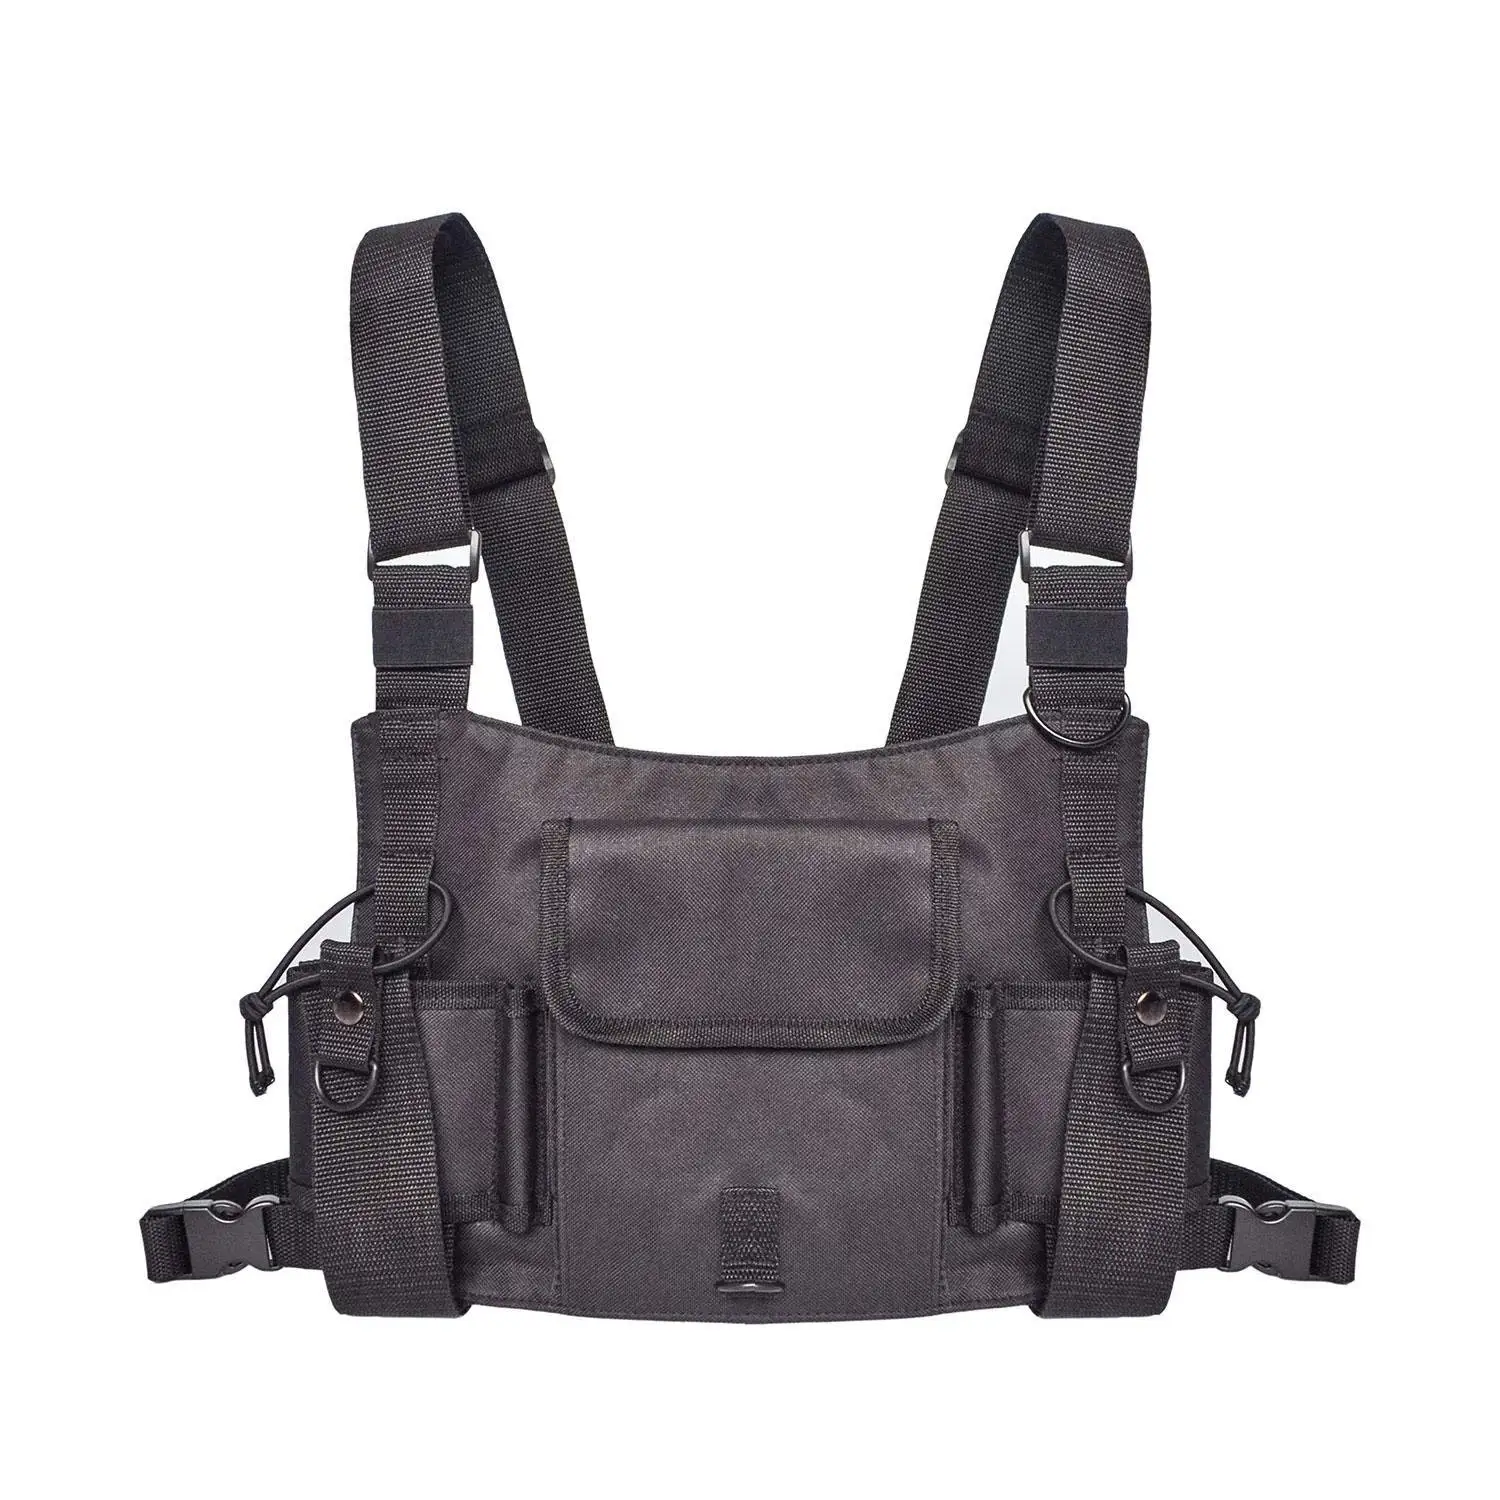 Cheap Chest Rig Molle, find Chest Rig Molle deals on line at Alibaba.com